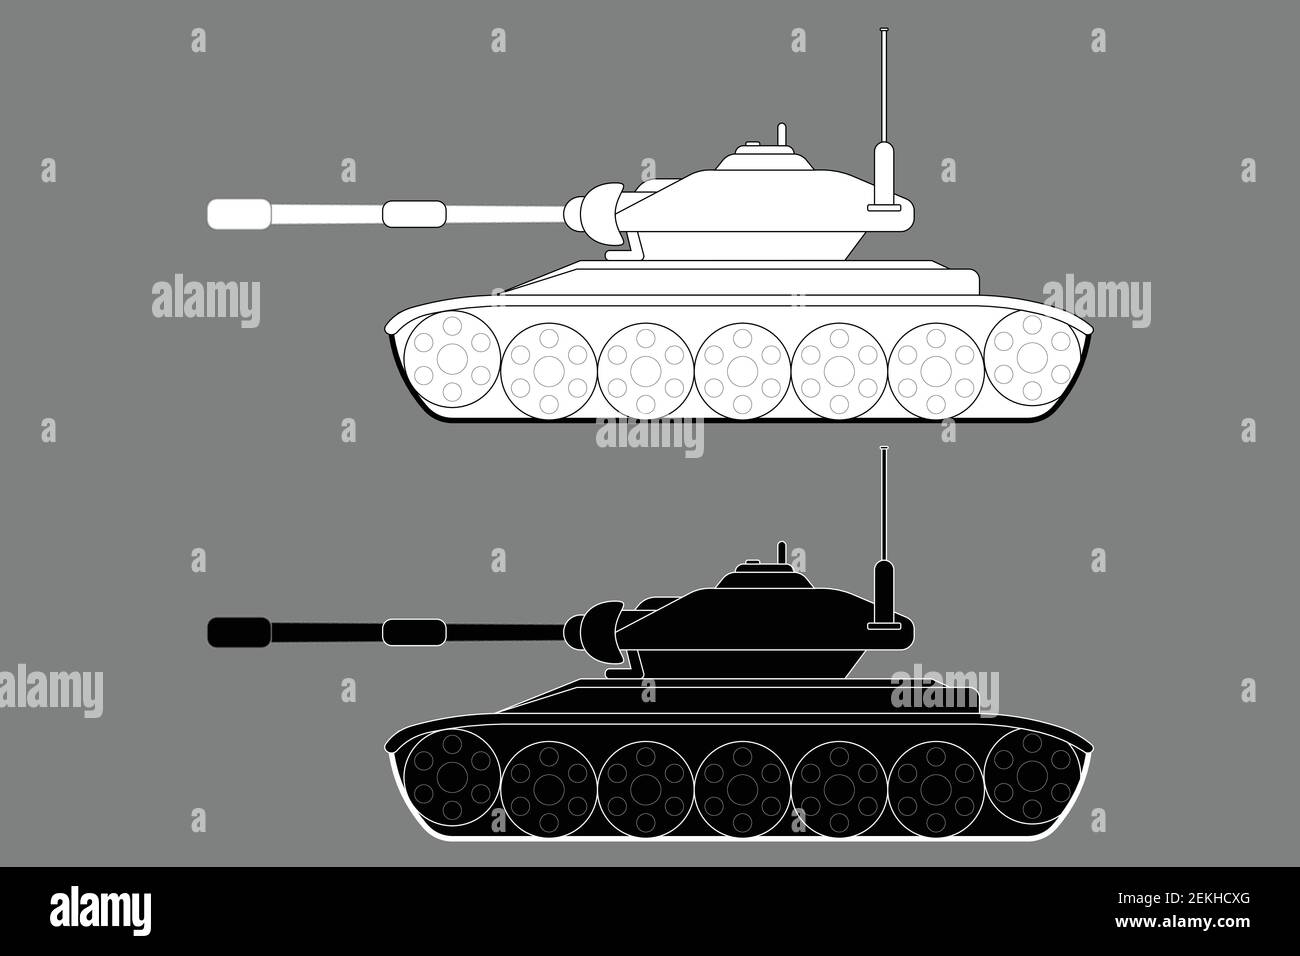 Side view of a tank - black and white outline Stock Vector